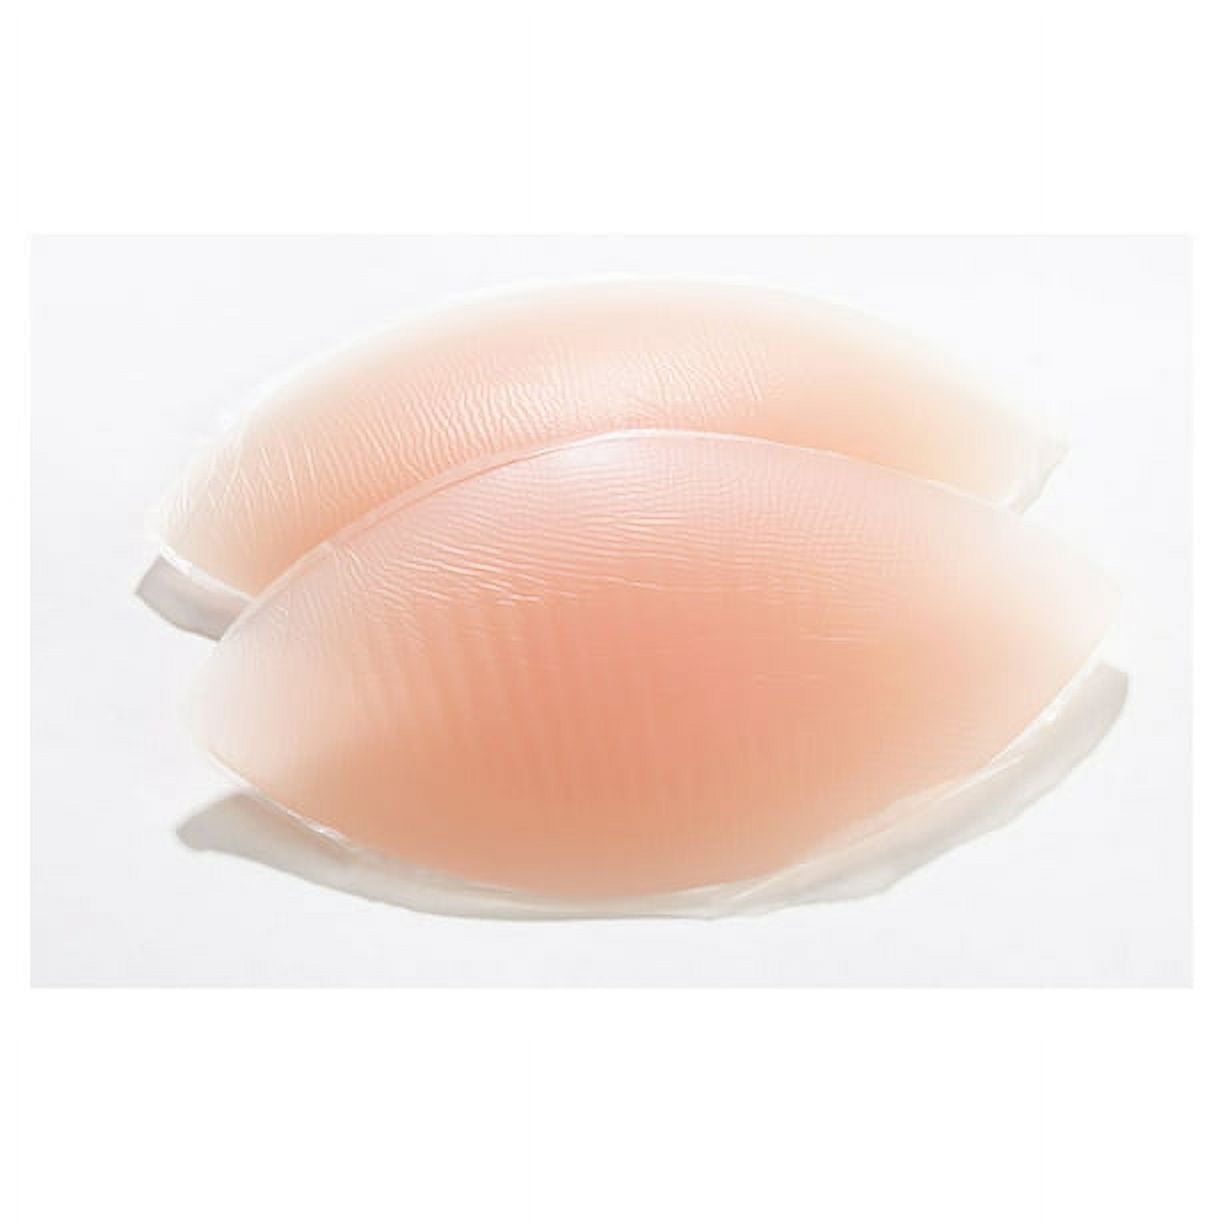 Lingerie Solutions Women's Lift It Up Gel Petals Nude Silicone Nipple  Covers One Size 